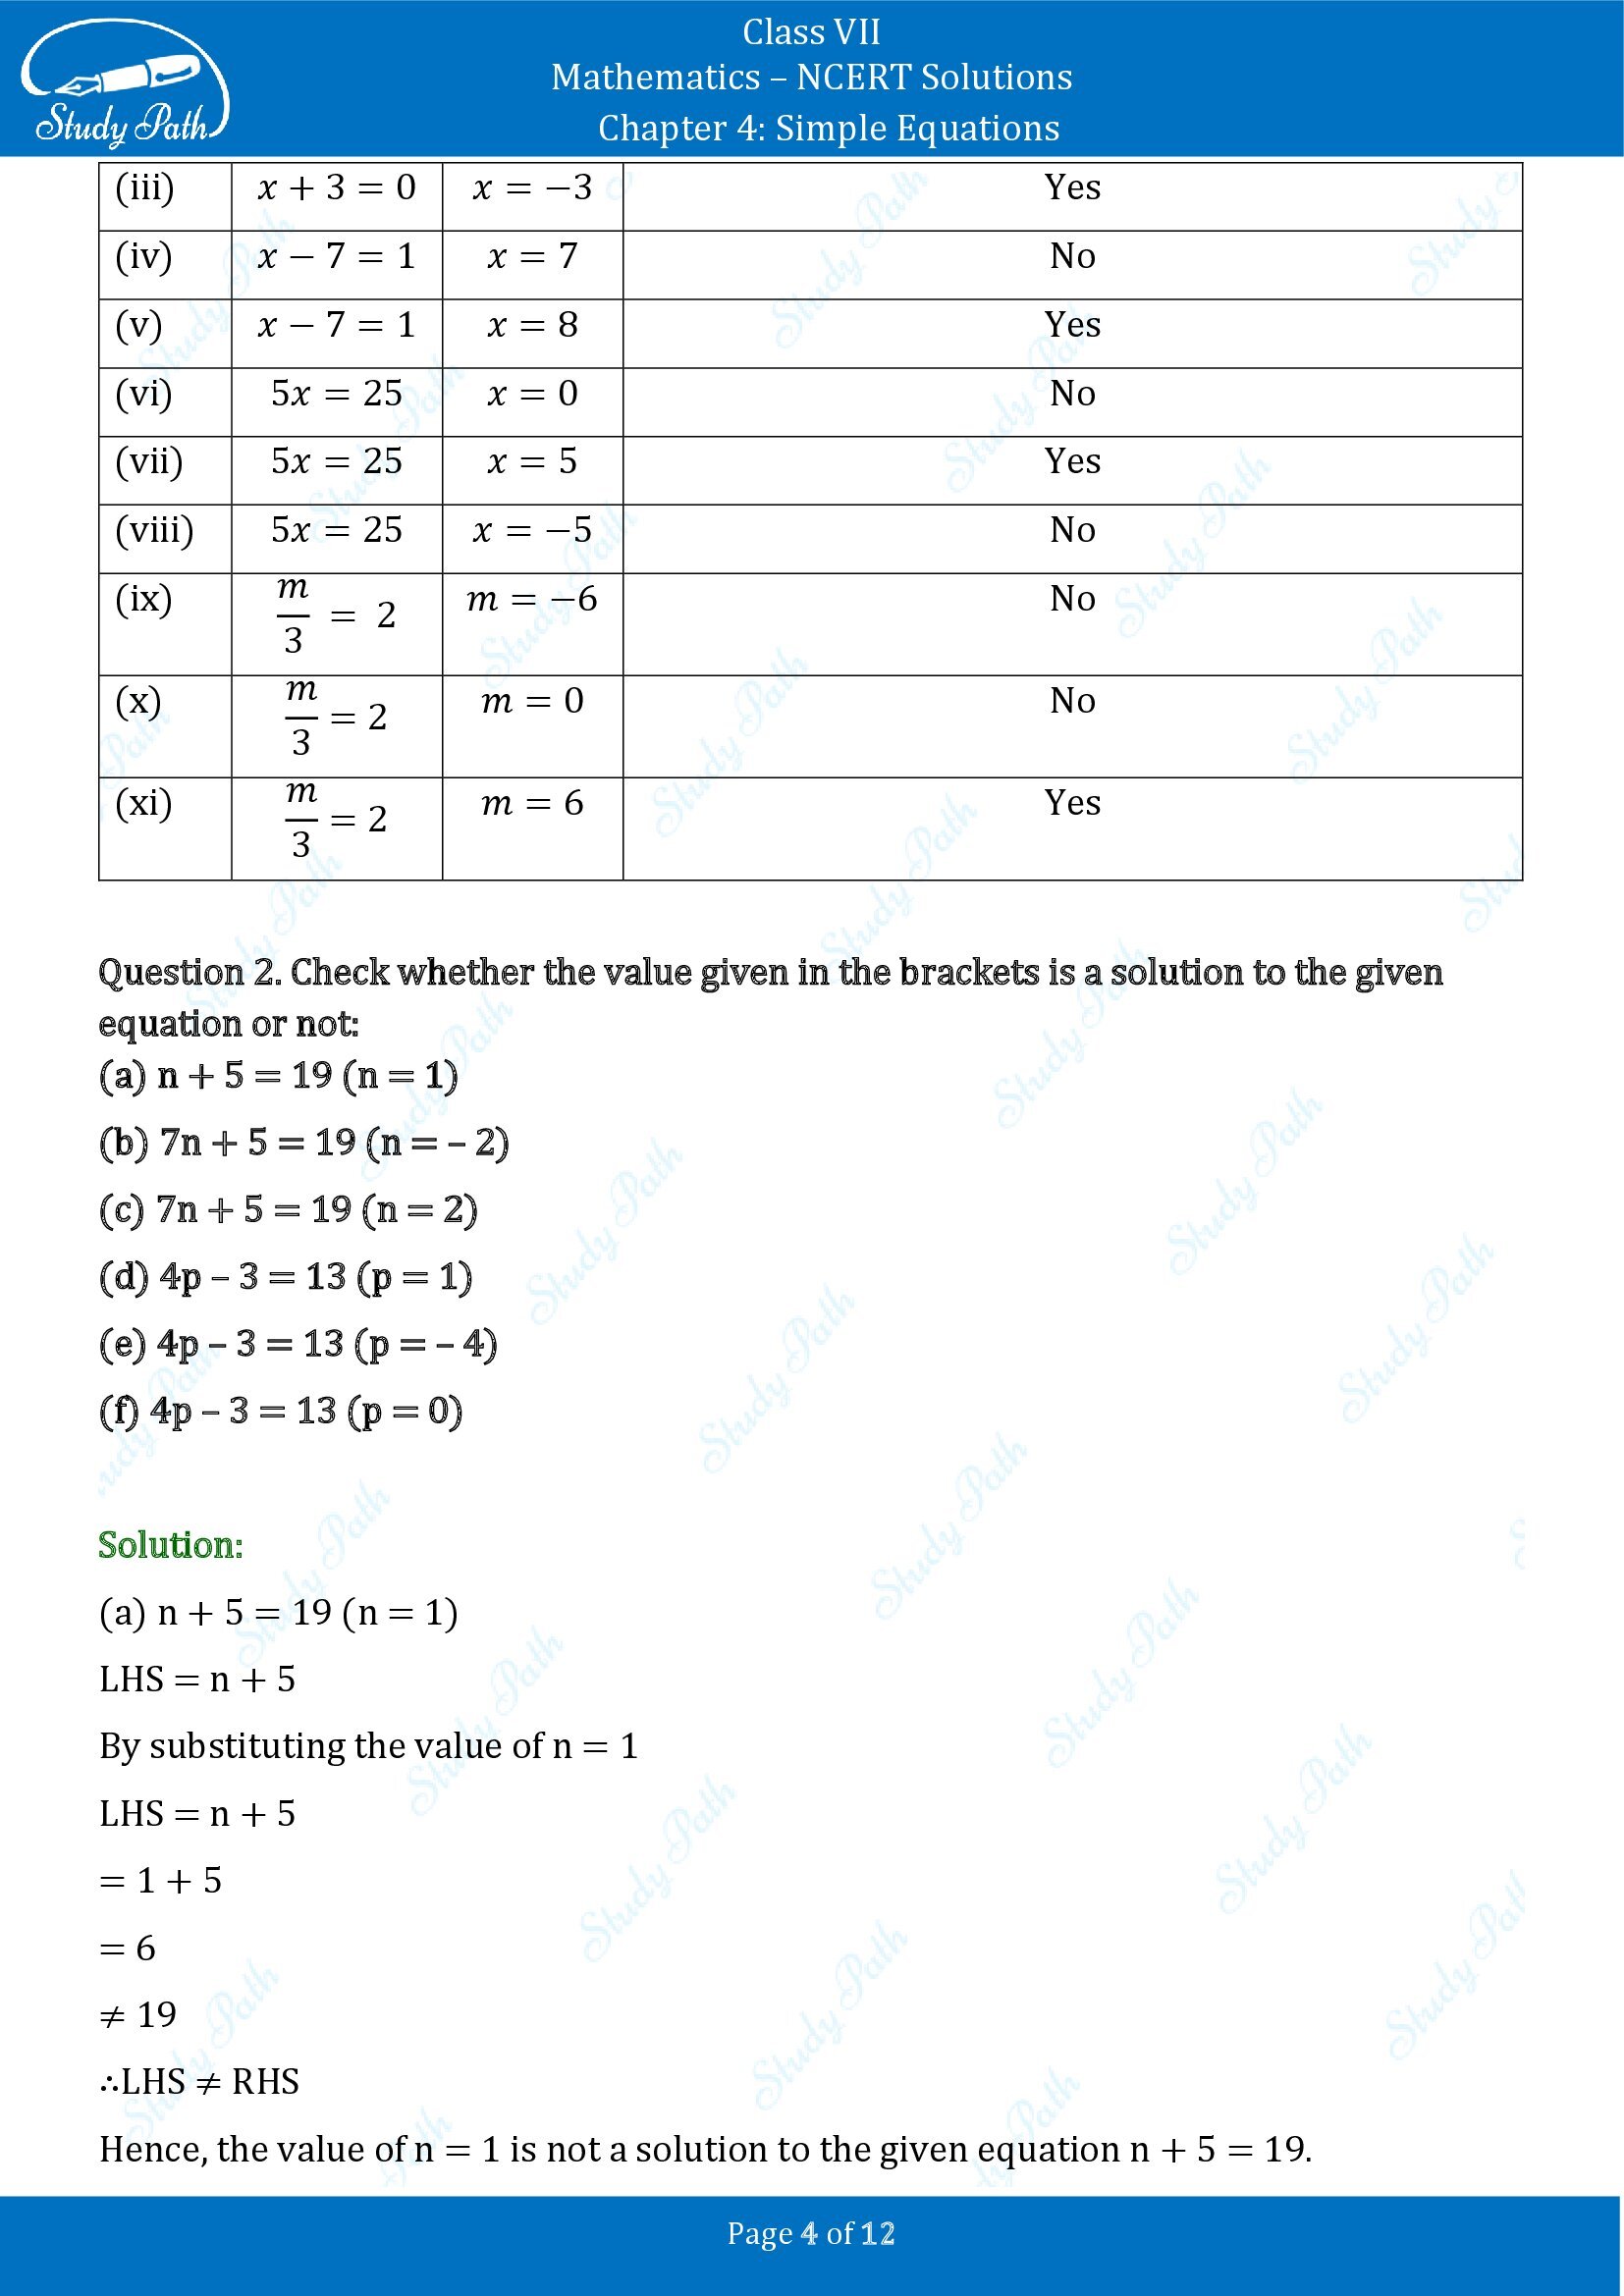 NCERT Solutions for Class 7 Maths Chapter 4 Simple Equations Exercise 4.1 00004